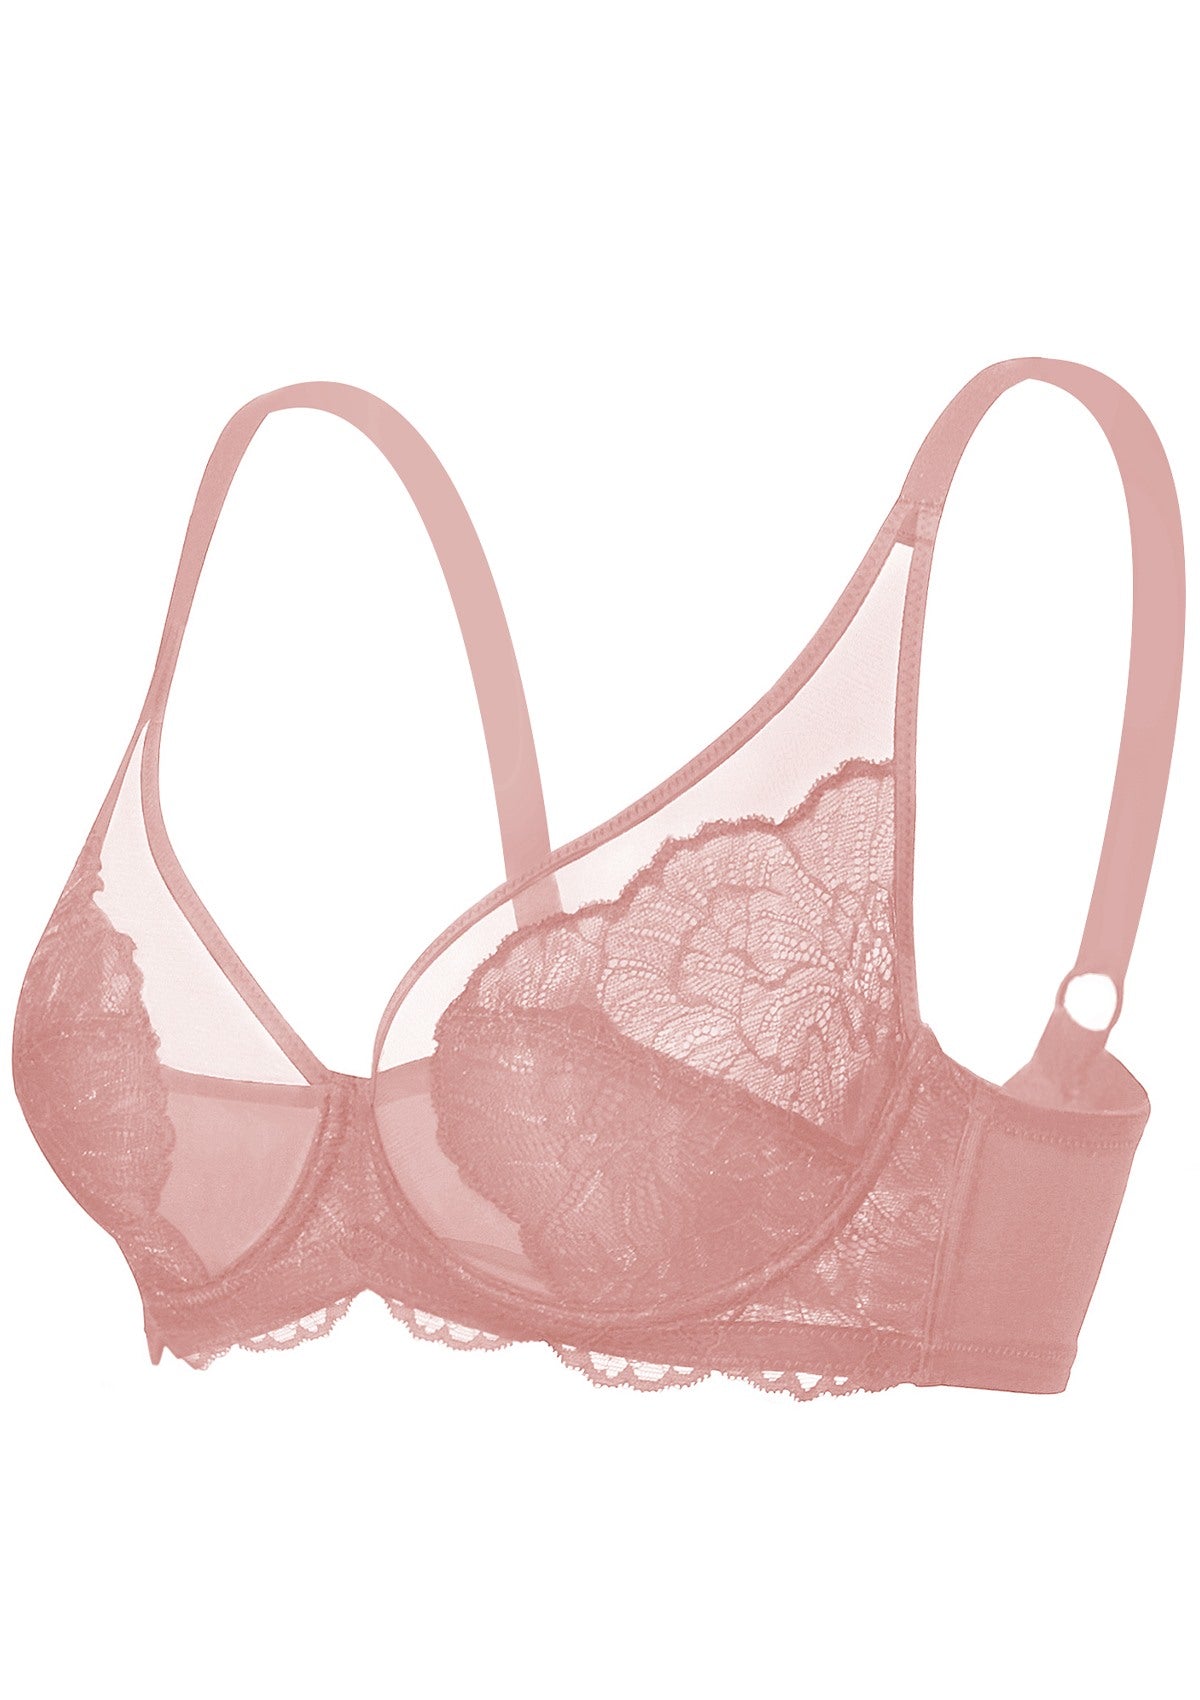 HSIA Blossom Unlined Lace Underwire Bra - Burgundy / 38 / C